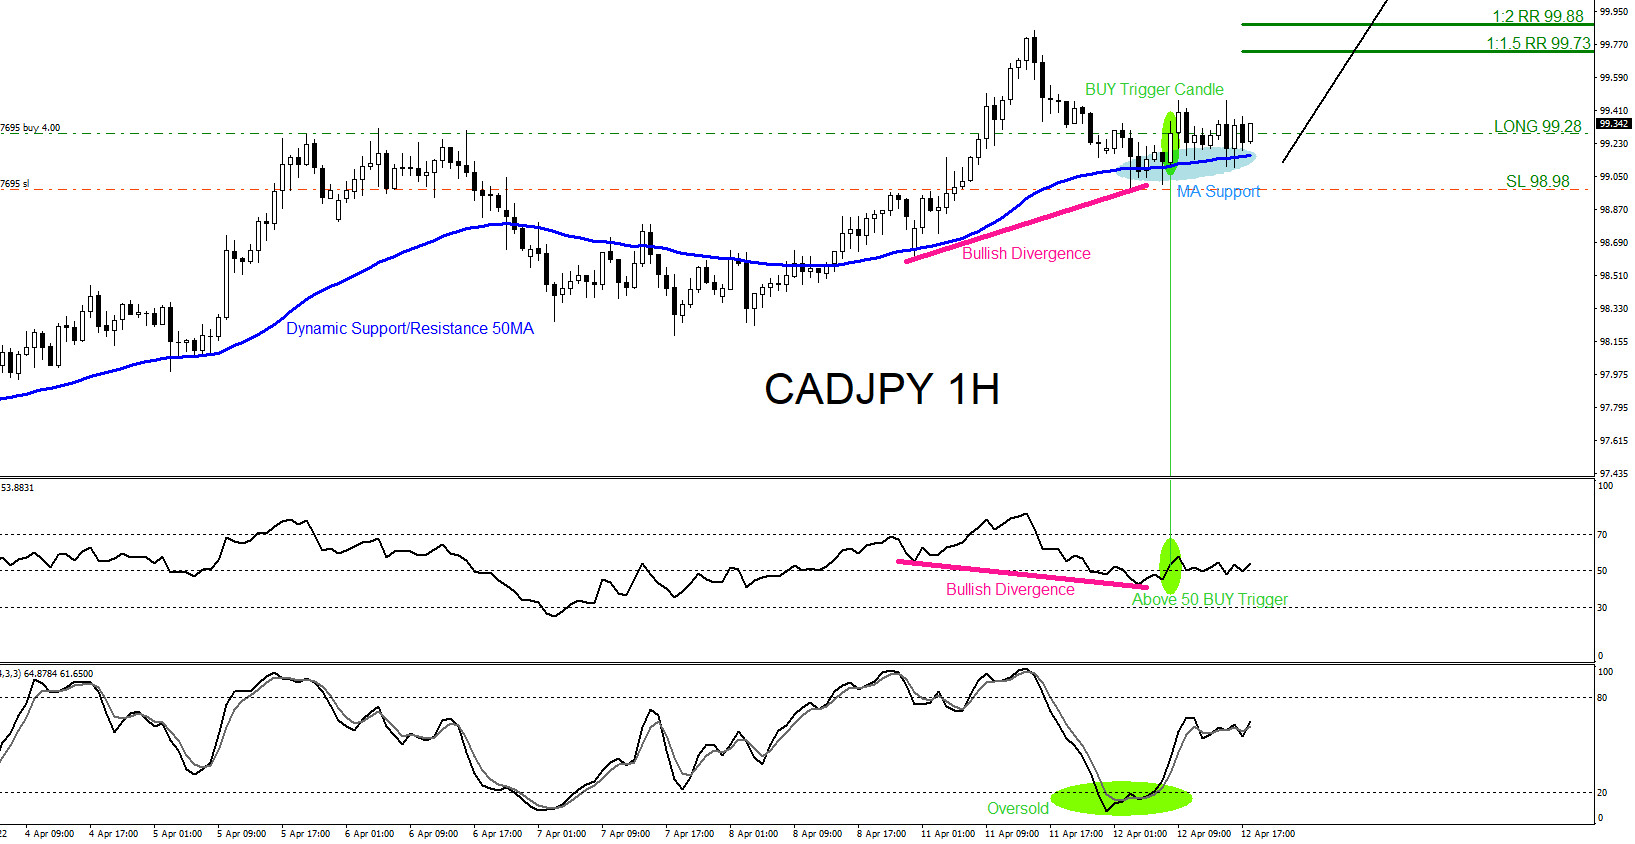 CADJPY : Catching the Buy Setup for a Move Higher